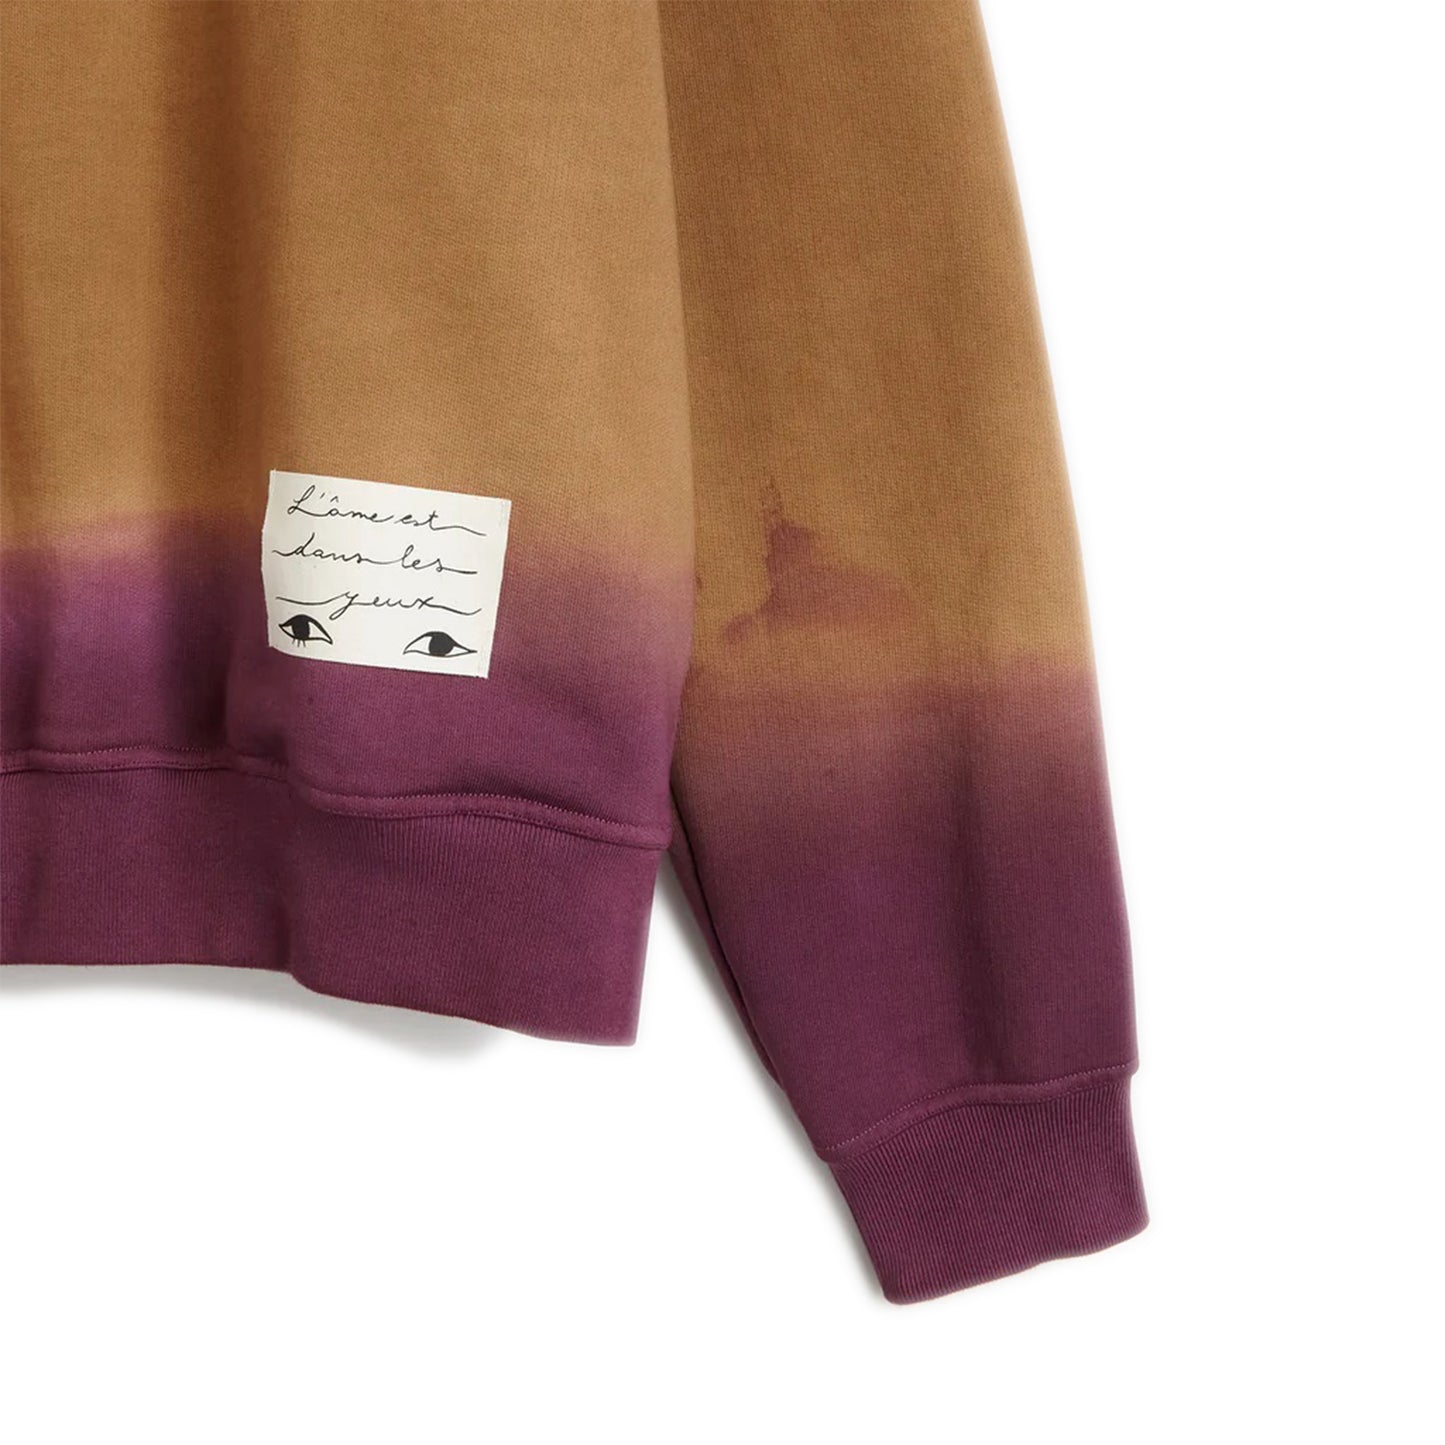 Valentino Sweater Light beige crewneck sweatshirt Embroidery on the left side Hidden message label on bottom left  Hand dyed cotton plush Composition: 100% cotton Dry clean Country of origin: Italy